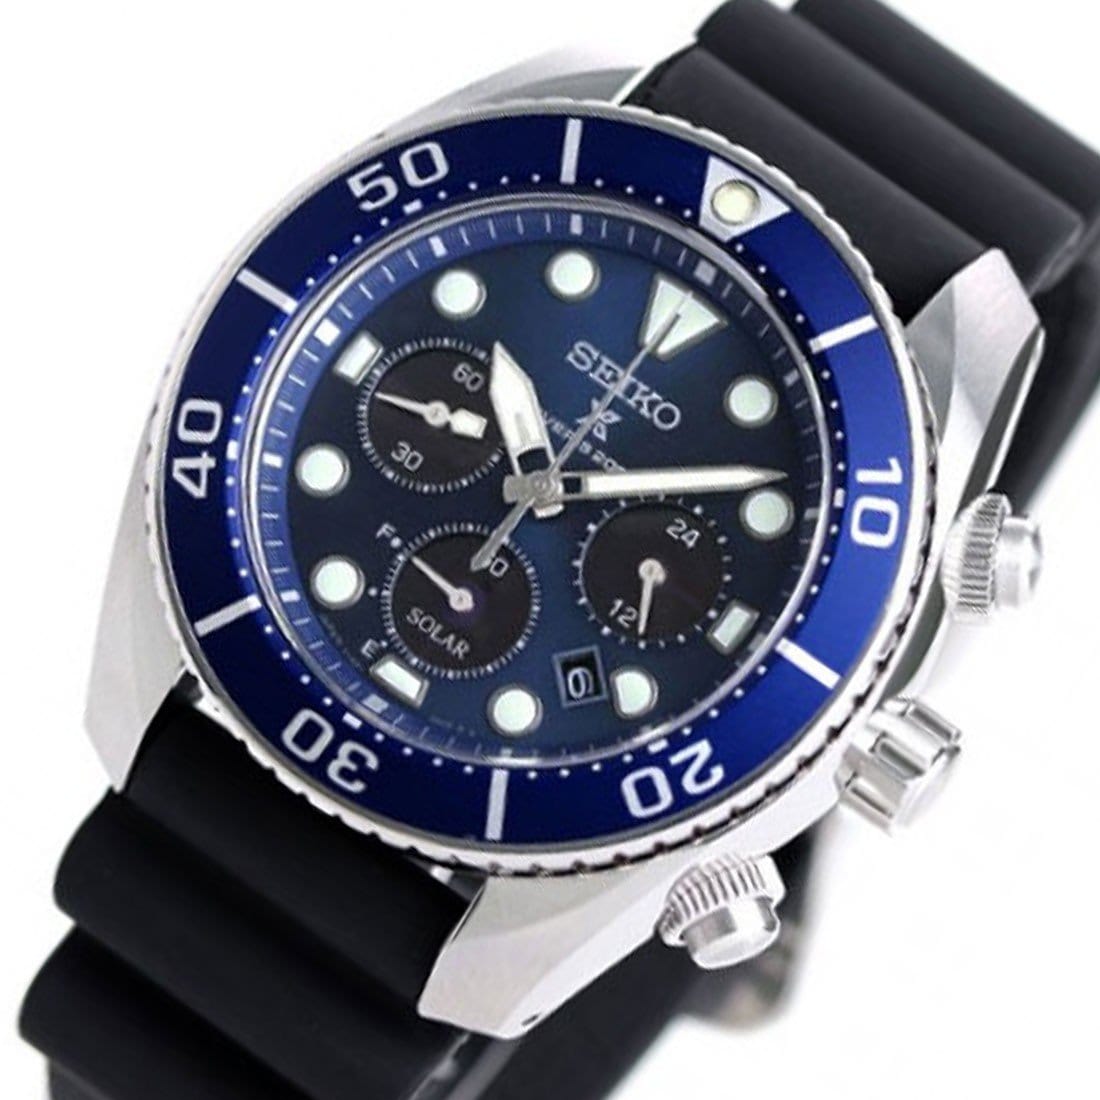 SBDL063 Seiko Prospex Solar Powered Male Divers Watch (BACKORDER)